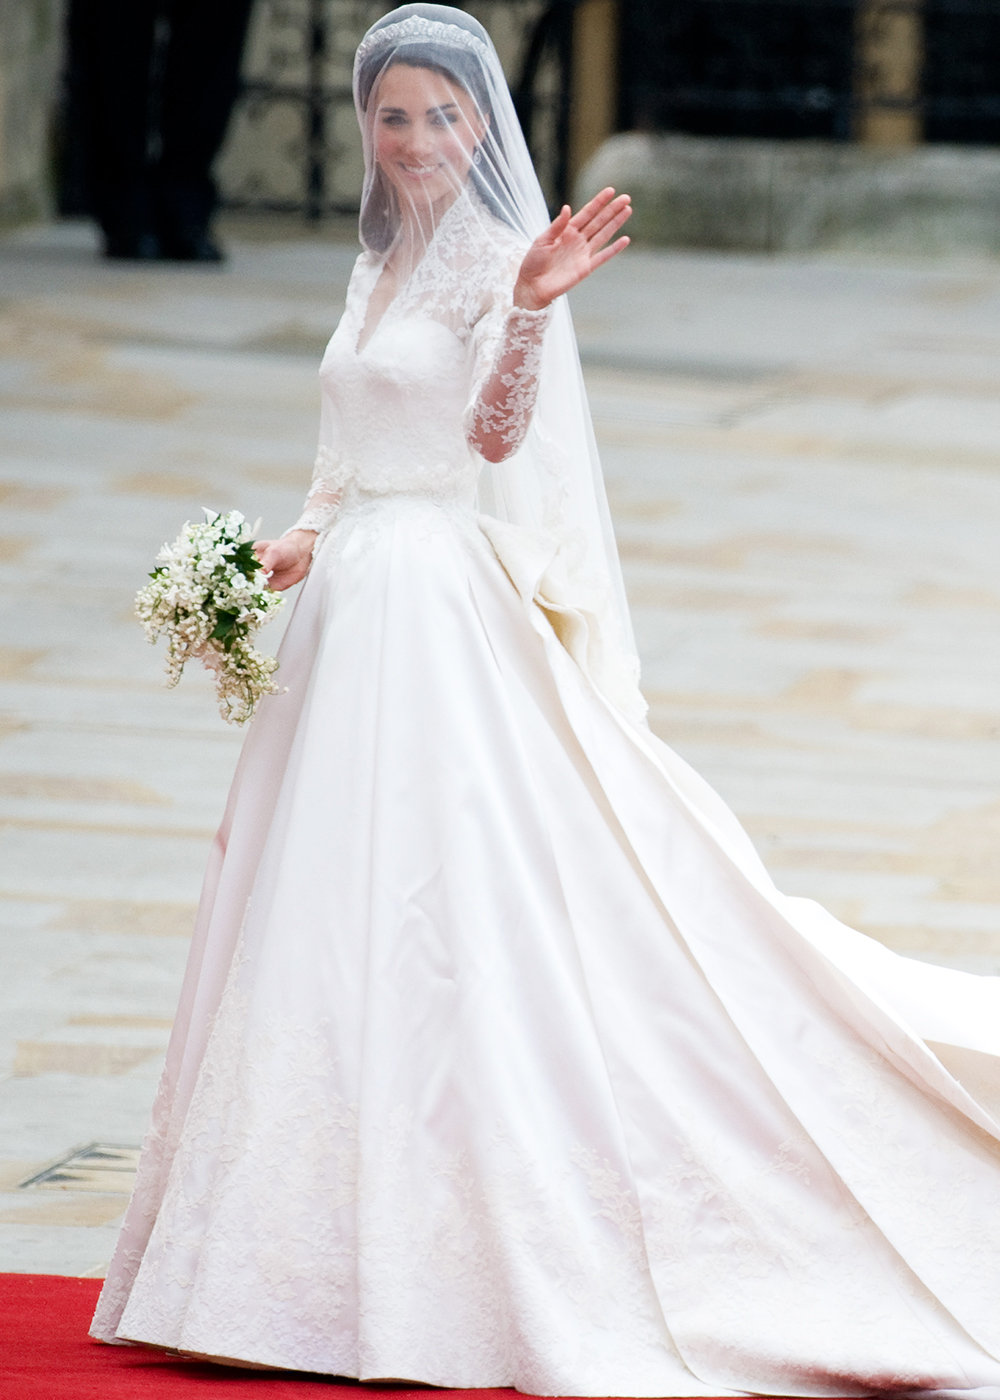 Kate Middleton in her iconic Alexander McQueen wedding dress.